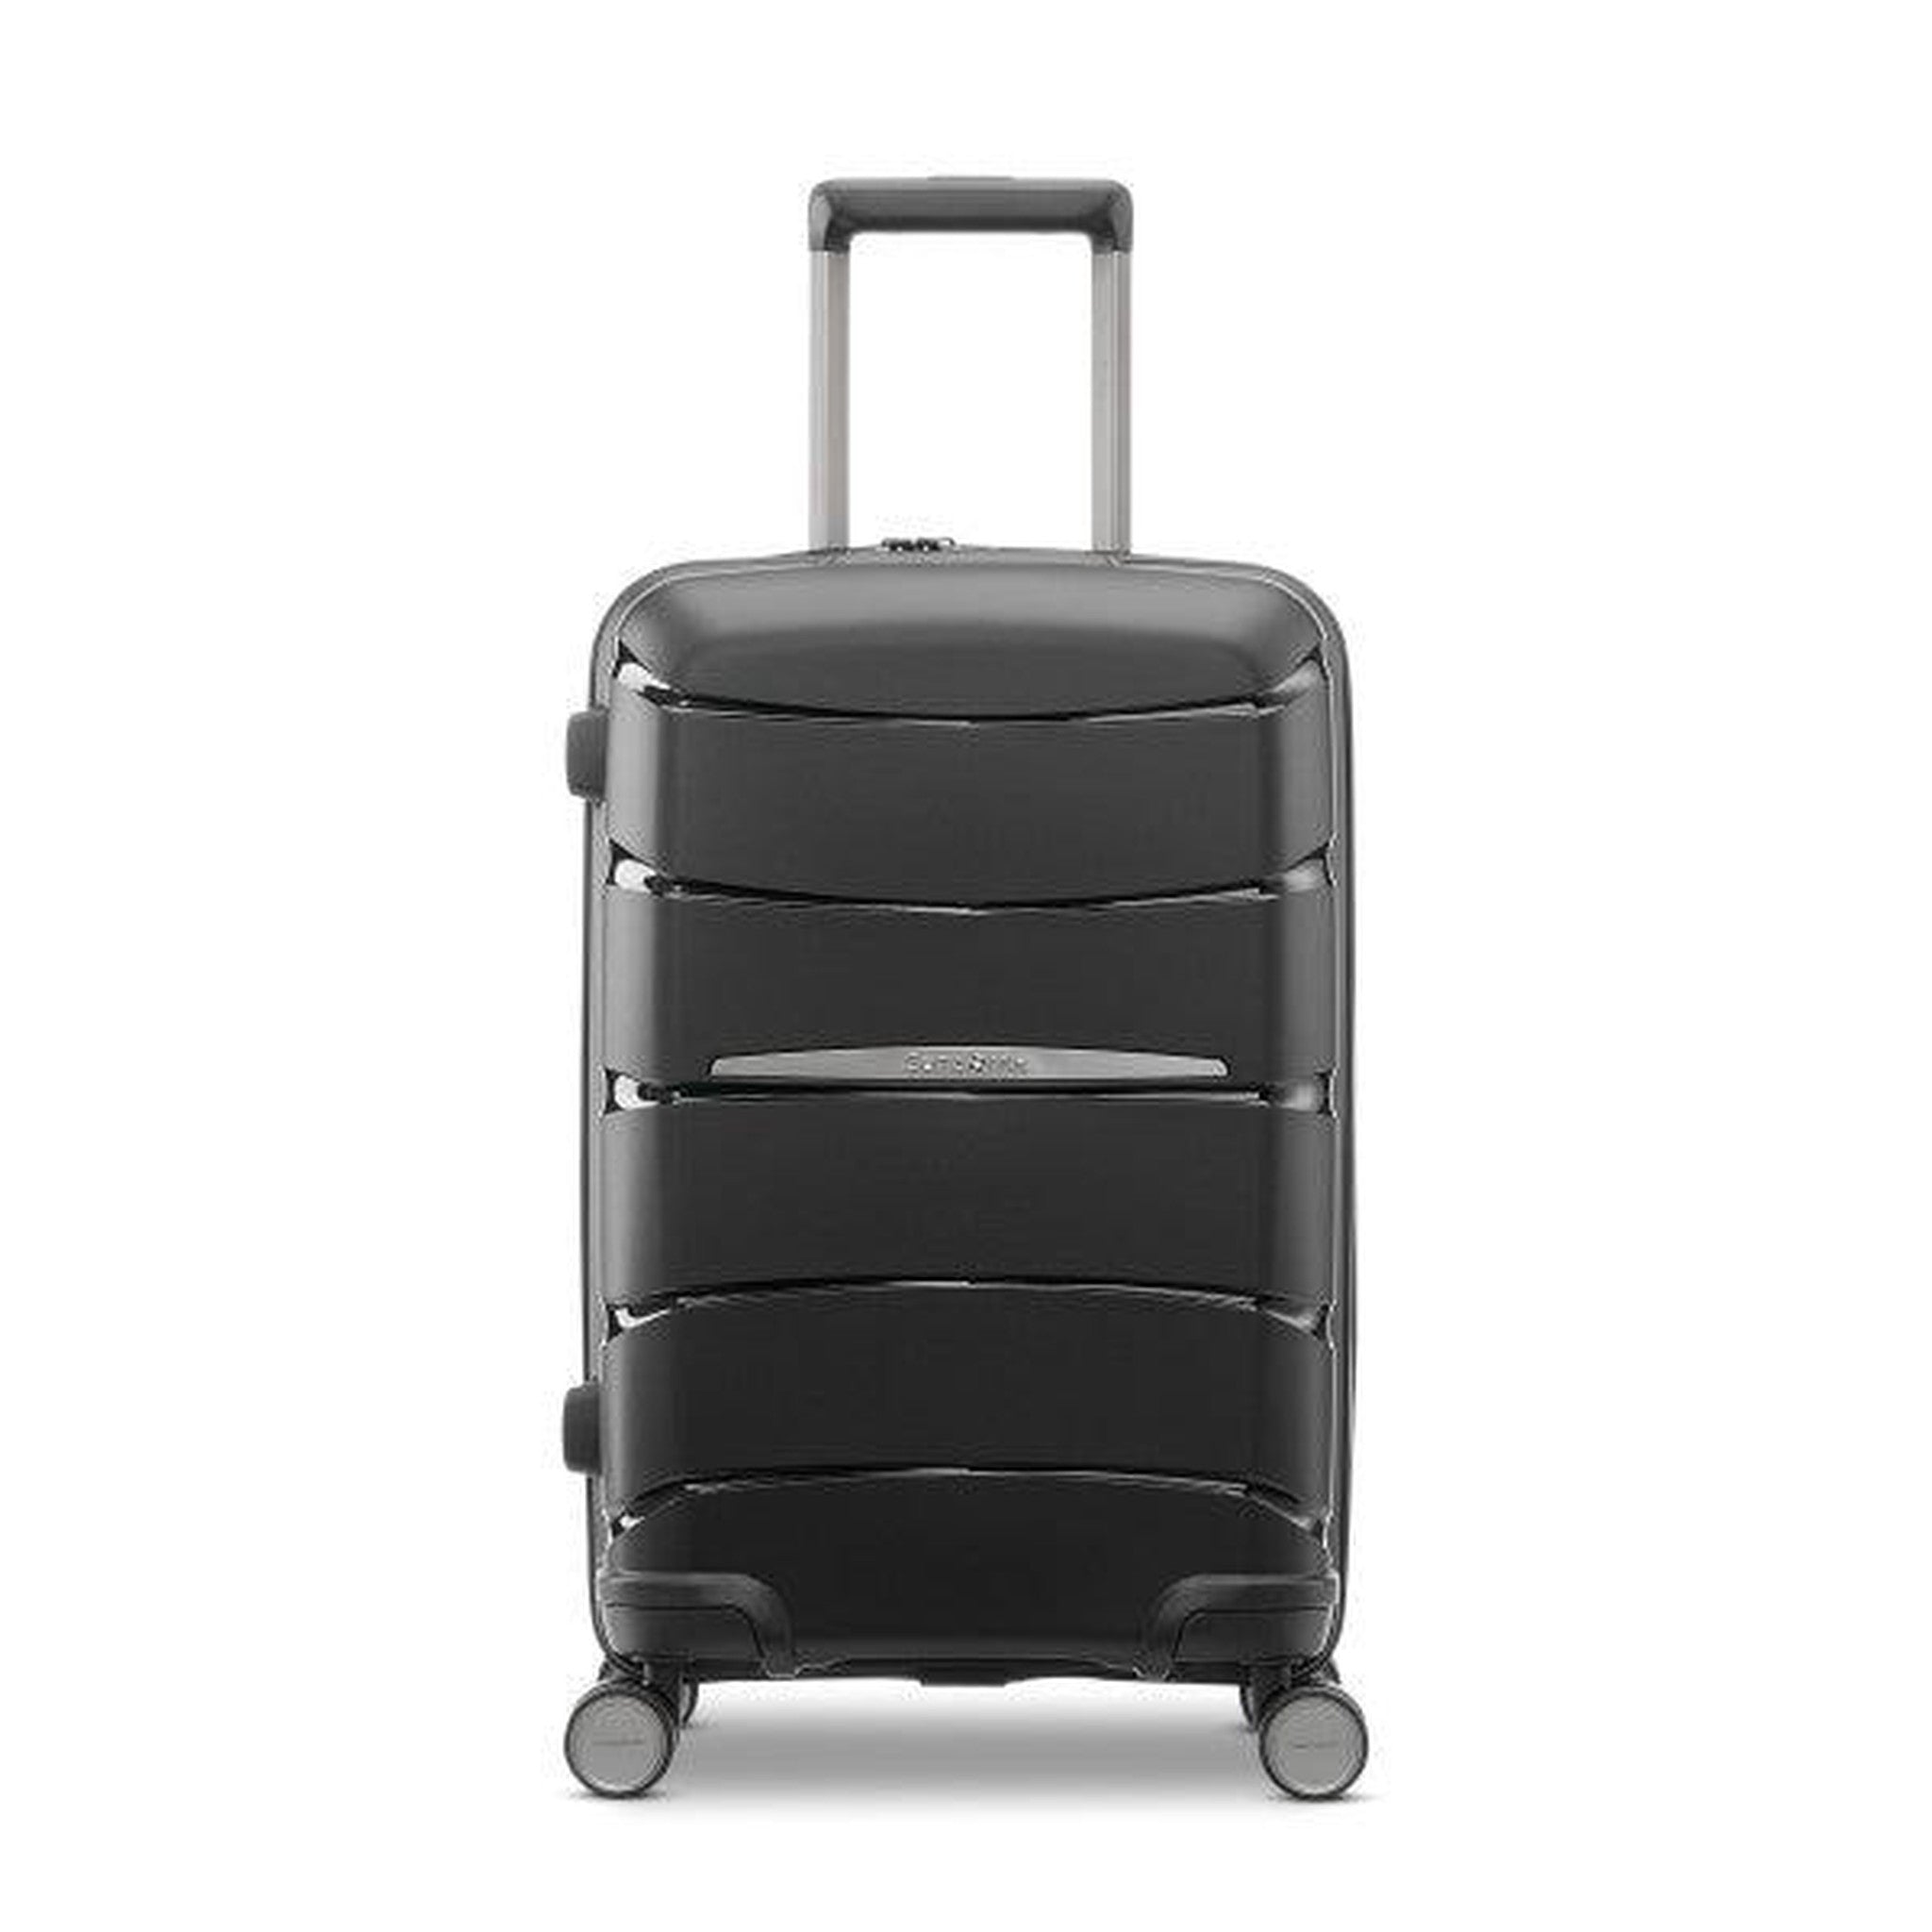 Samsonite Outline Pro 22x14x9 Carry-On Spinner – Luggage Pros